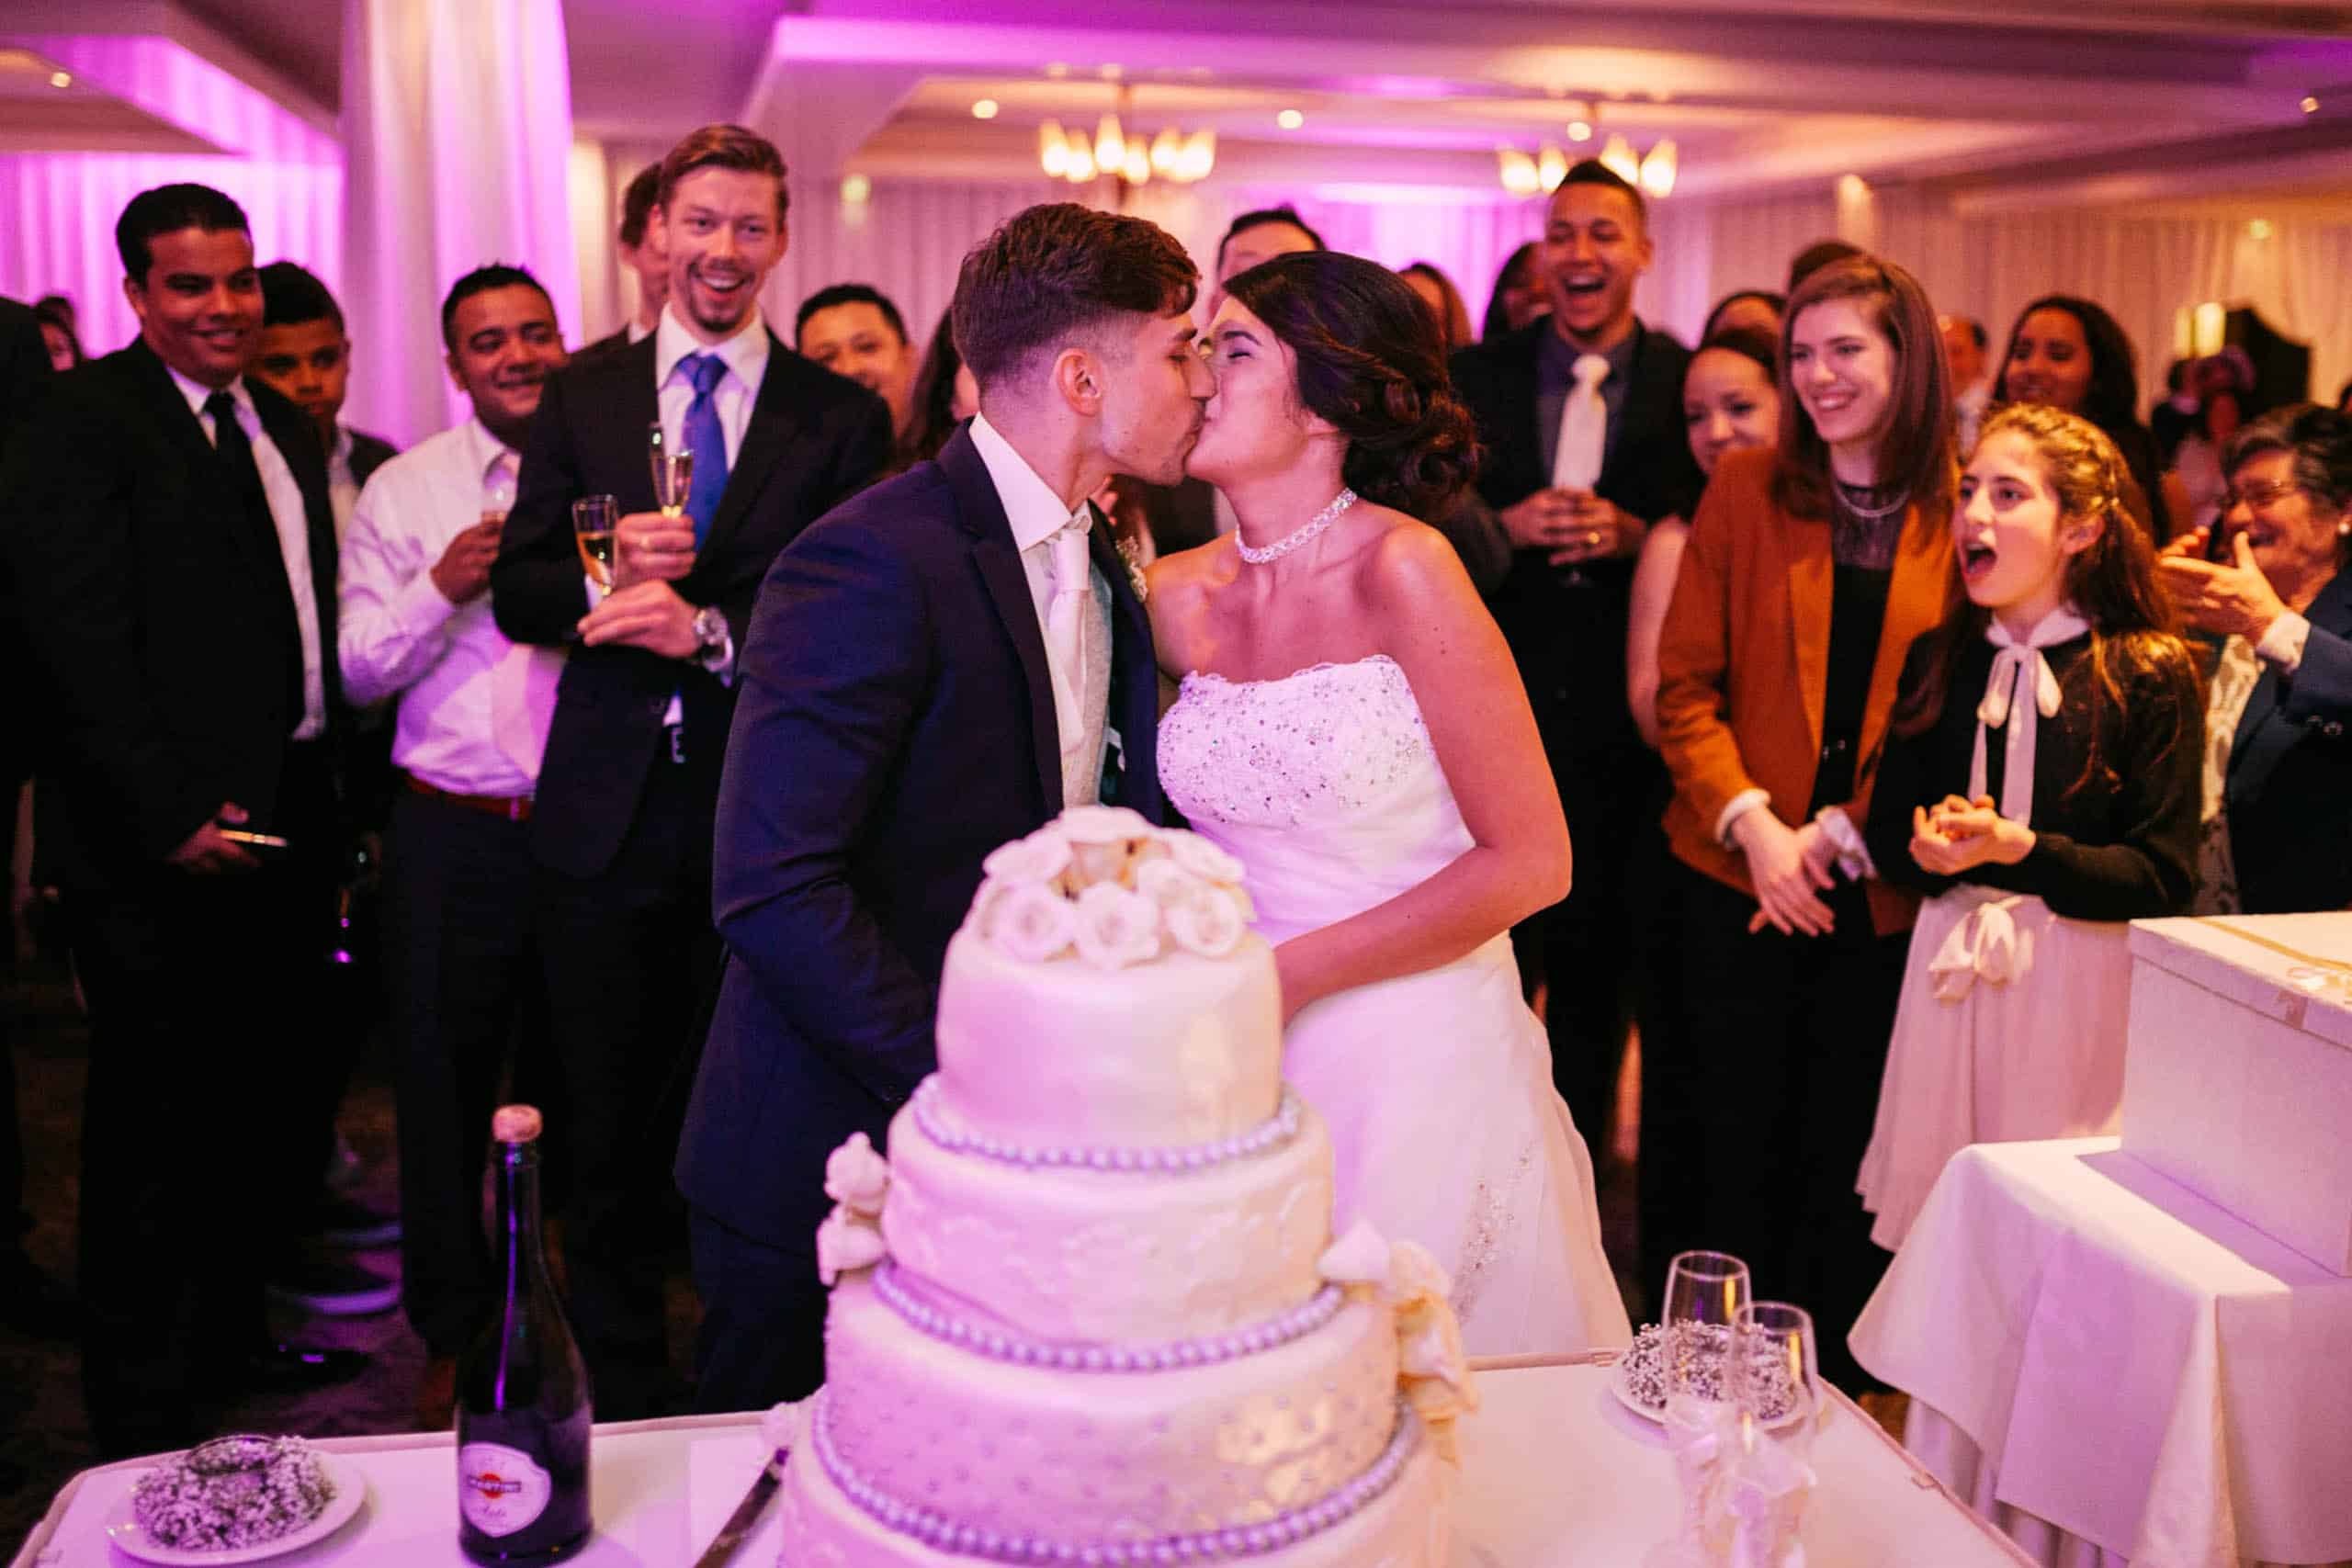 A bride and groom kissing in front of their wedding cakes.